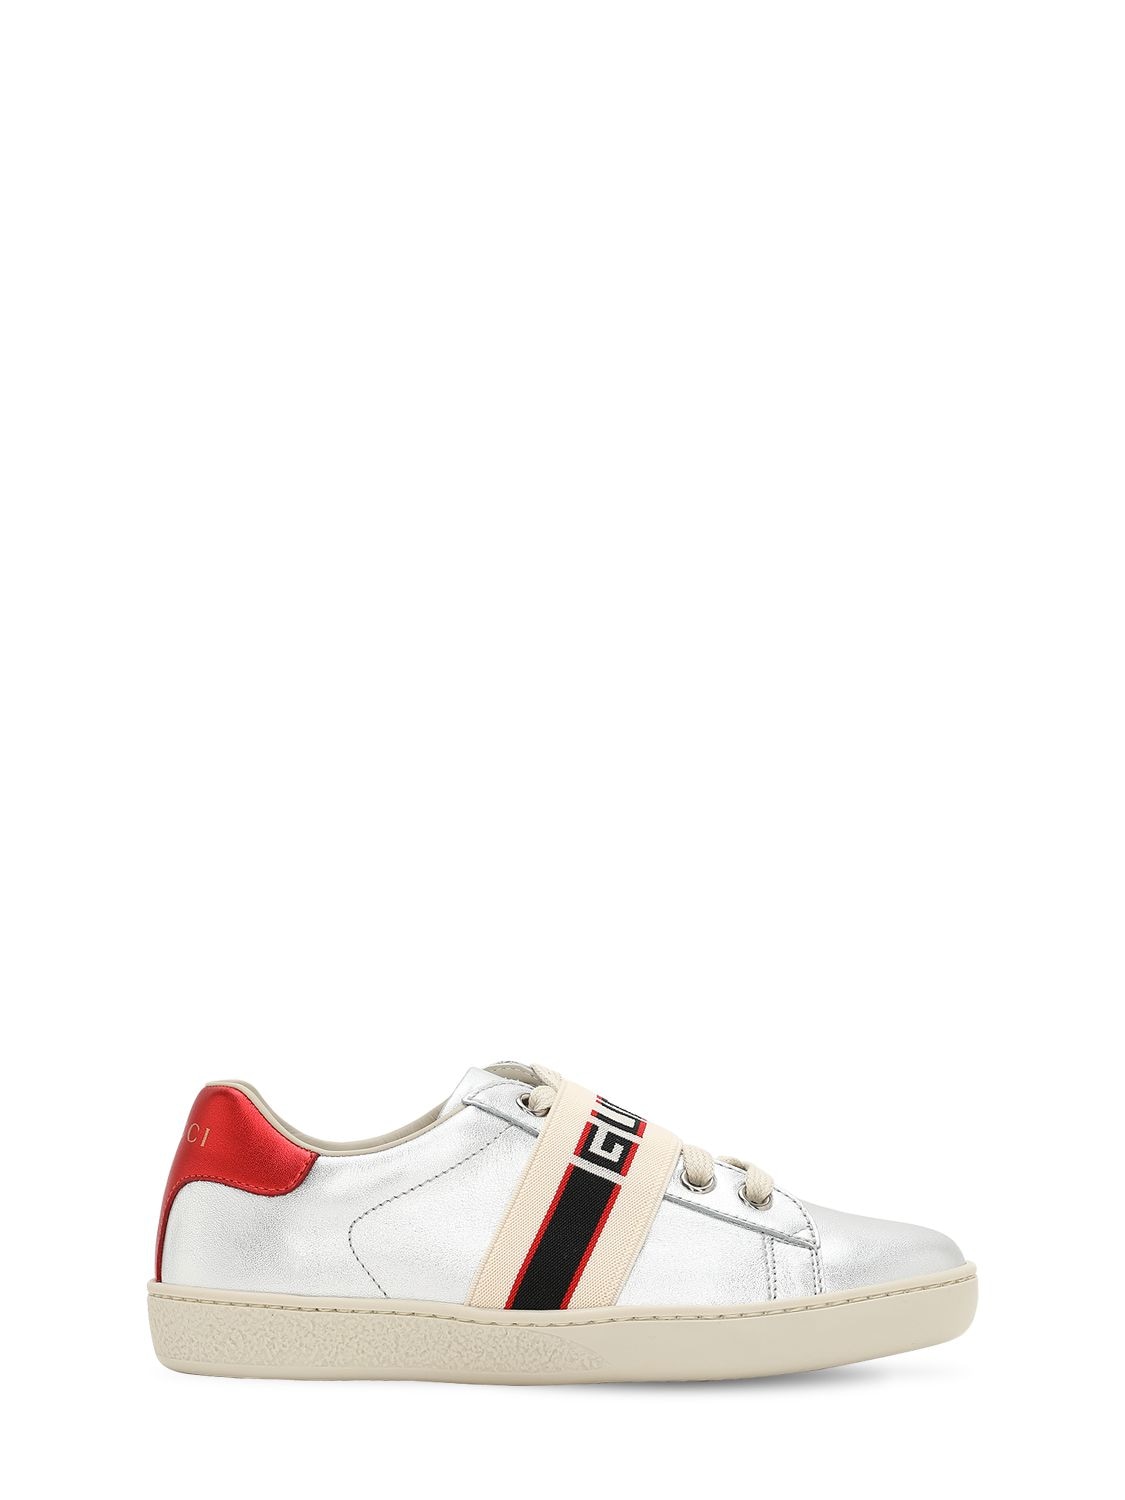 GUCCI NEW ACE METALLIC LEATHER SNEAKERS,69IFHB012-ODE2NQ2